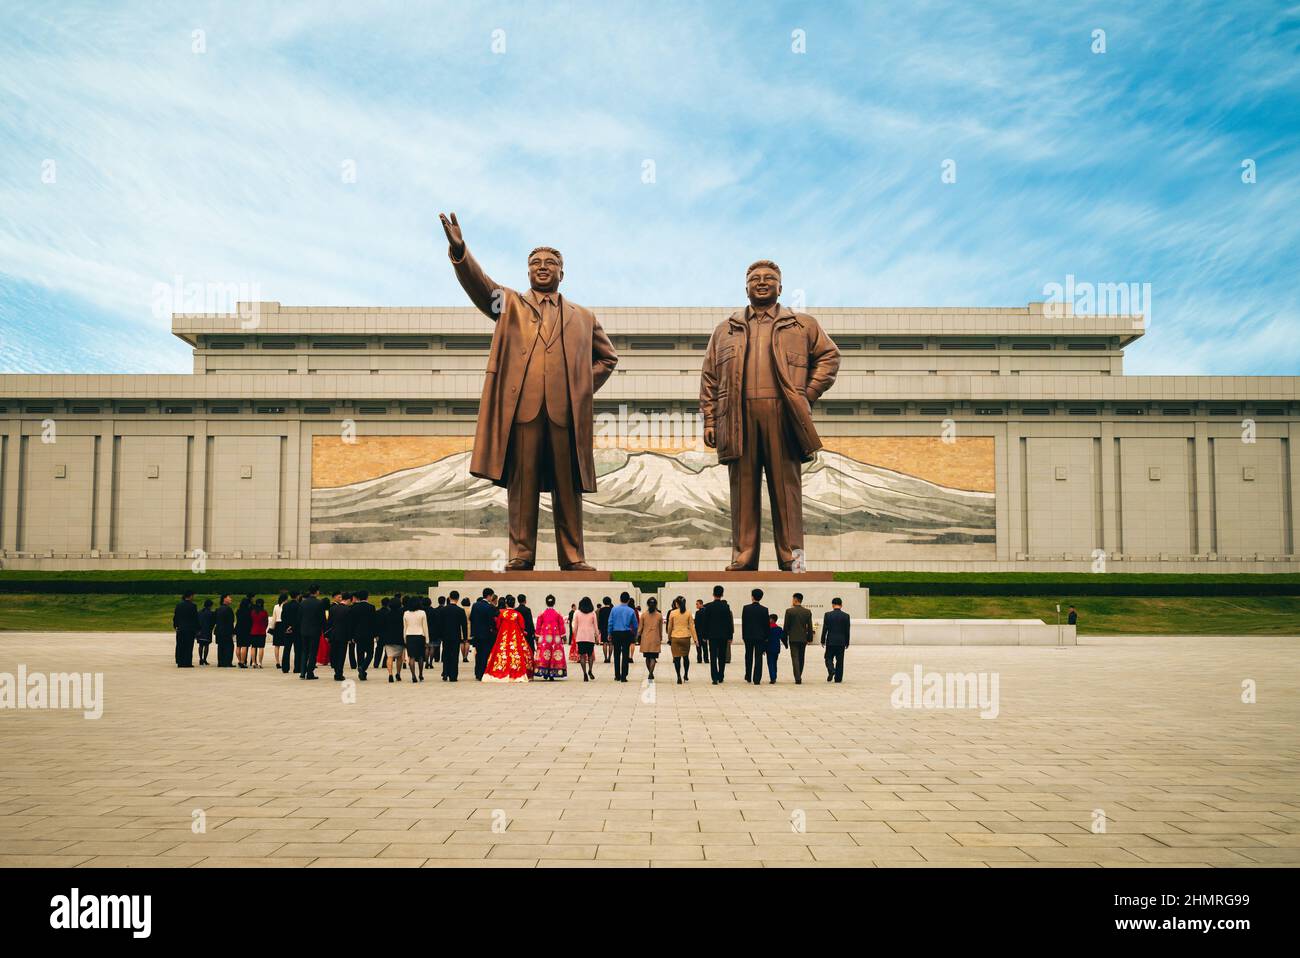 April 29, 2019: 20 meter tall Kim Il Sung and Kim Jong Il statues at the central part of  the Mansu Hill Grand Monument located at Mansudae, pyongyang Stock Photo